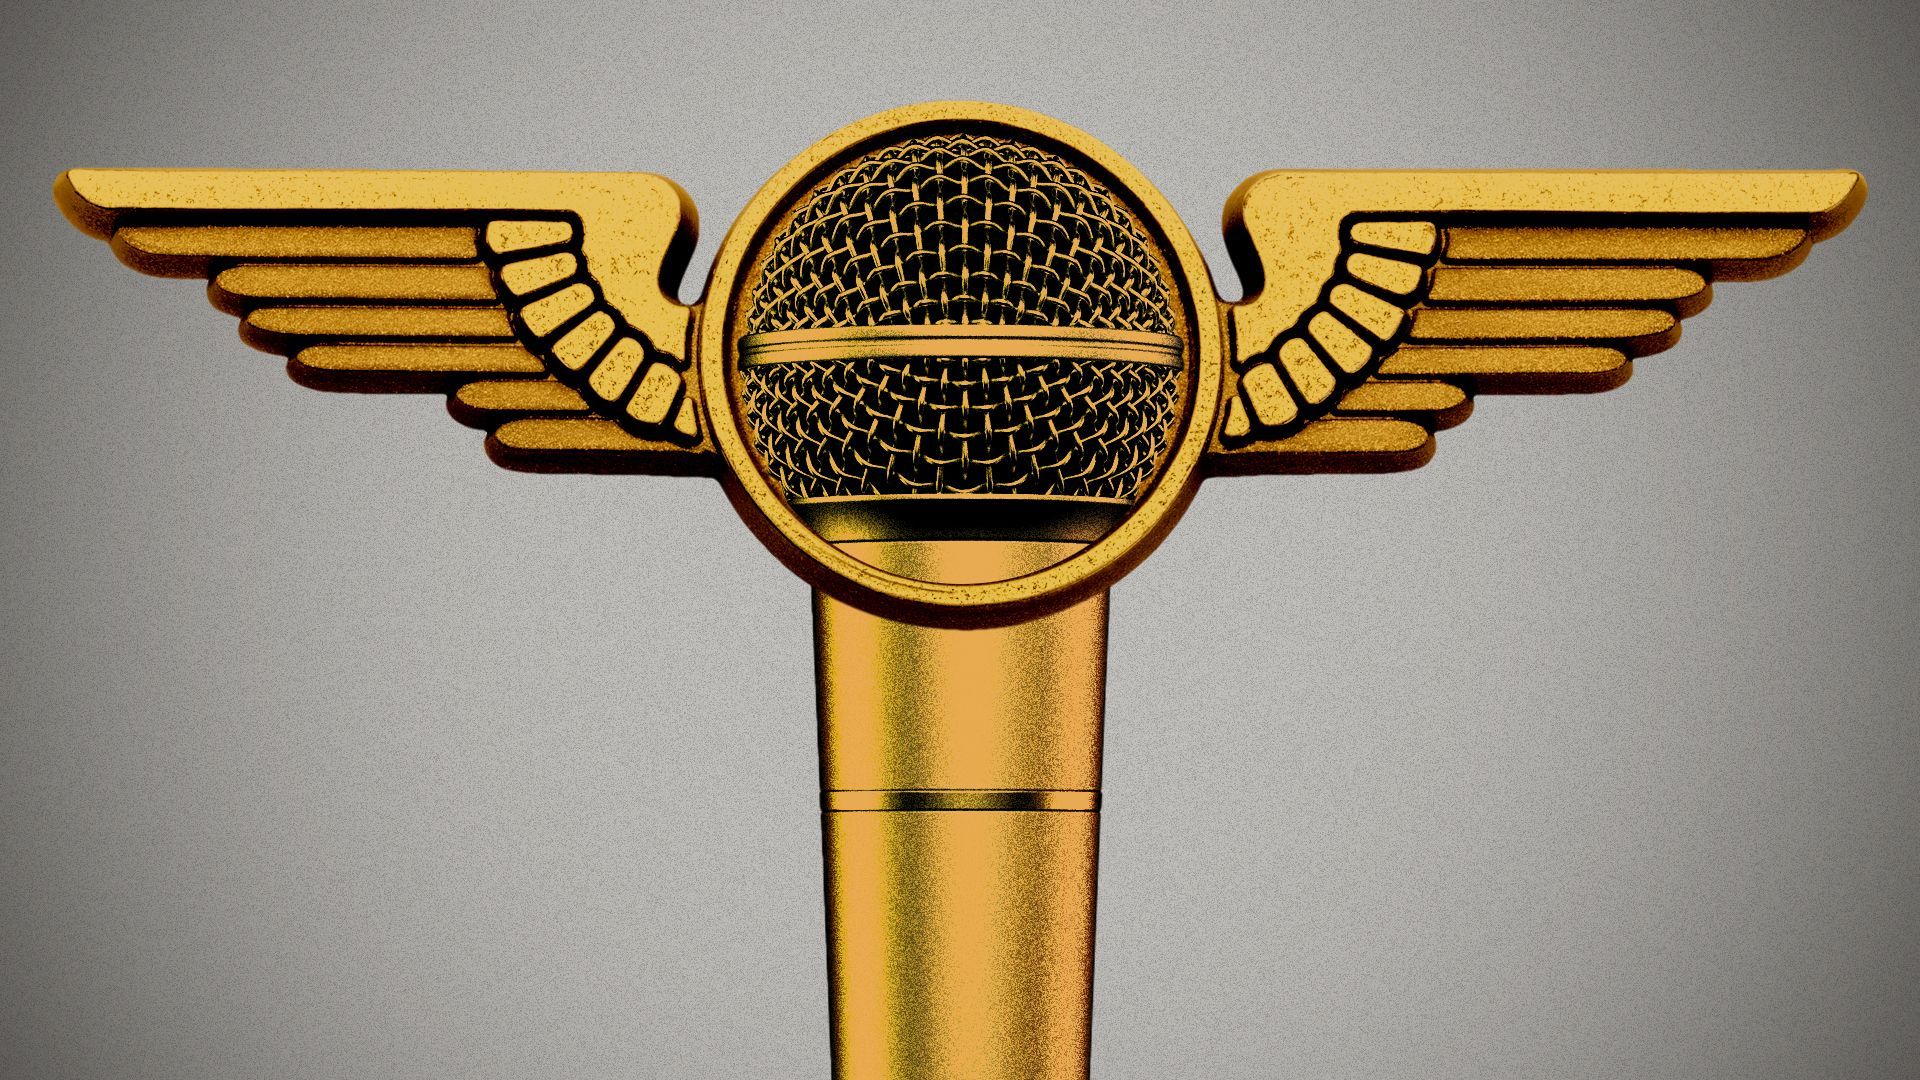 Illustration of a microphone combined with gold pilot wings